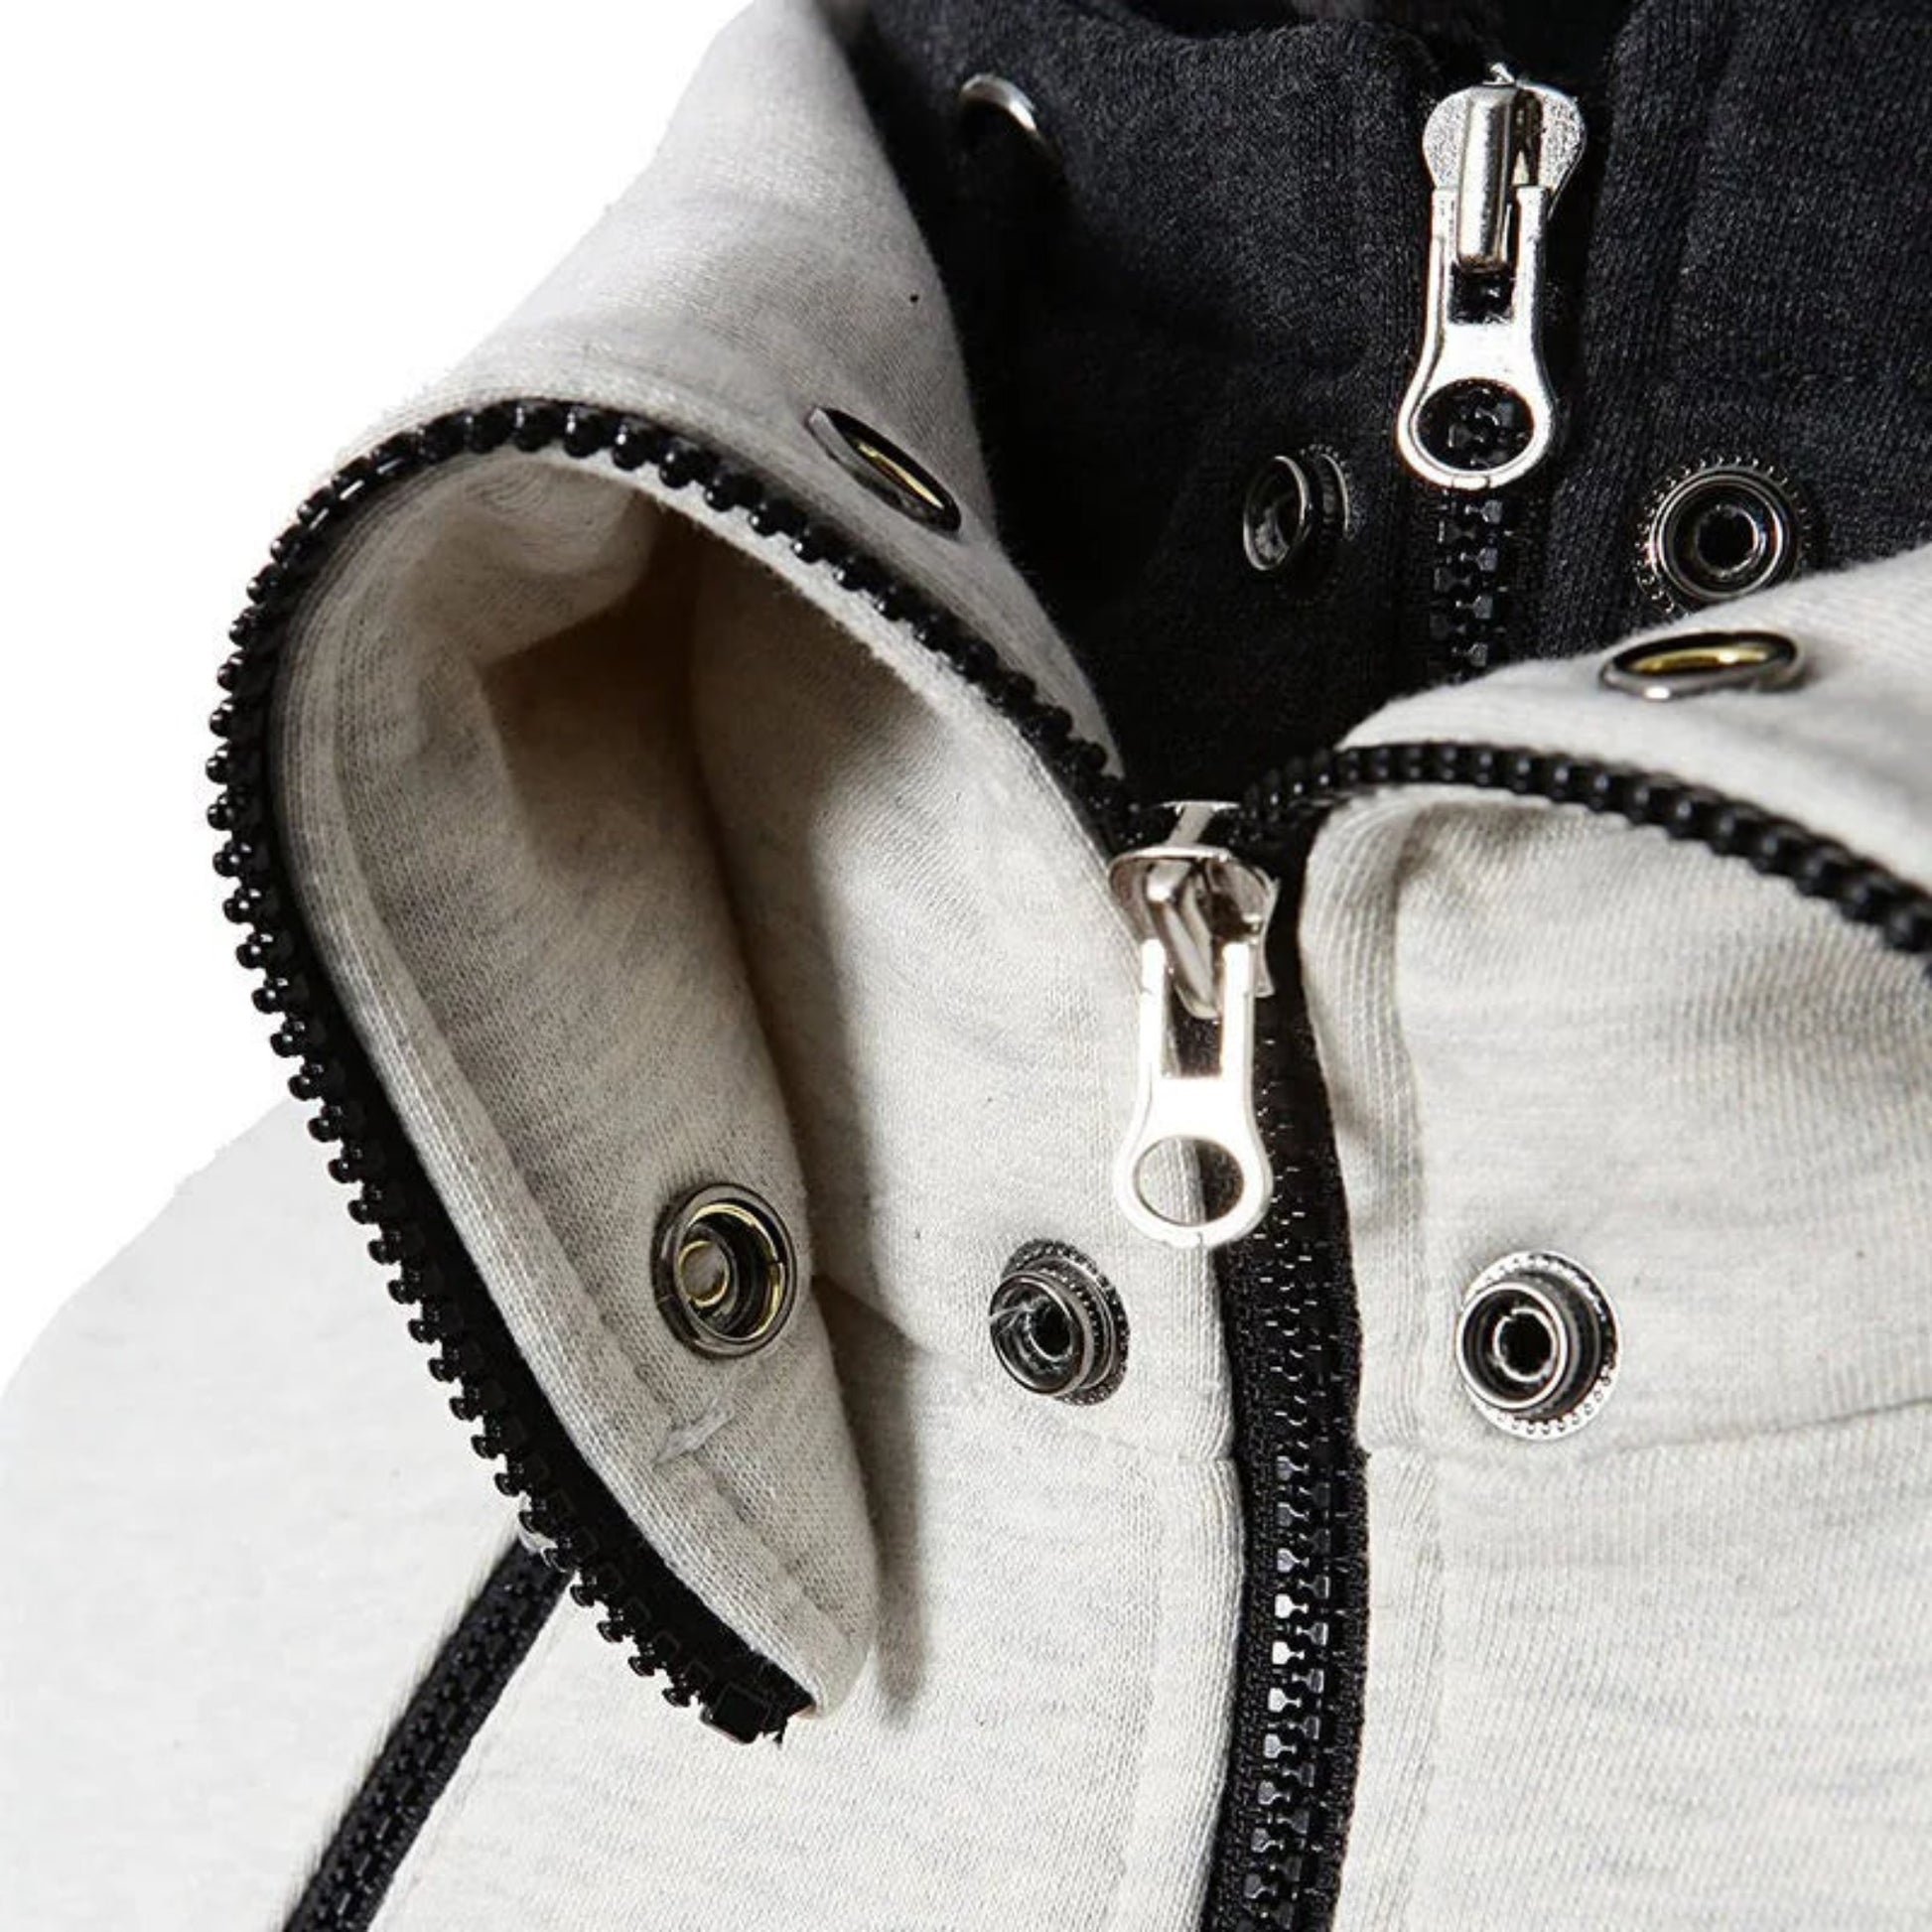 Unisex Jacket close up in the zipper 